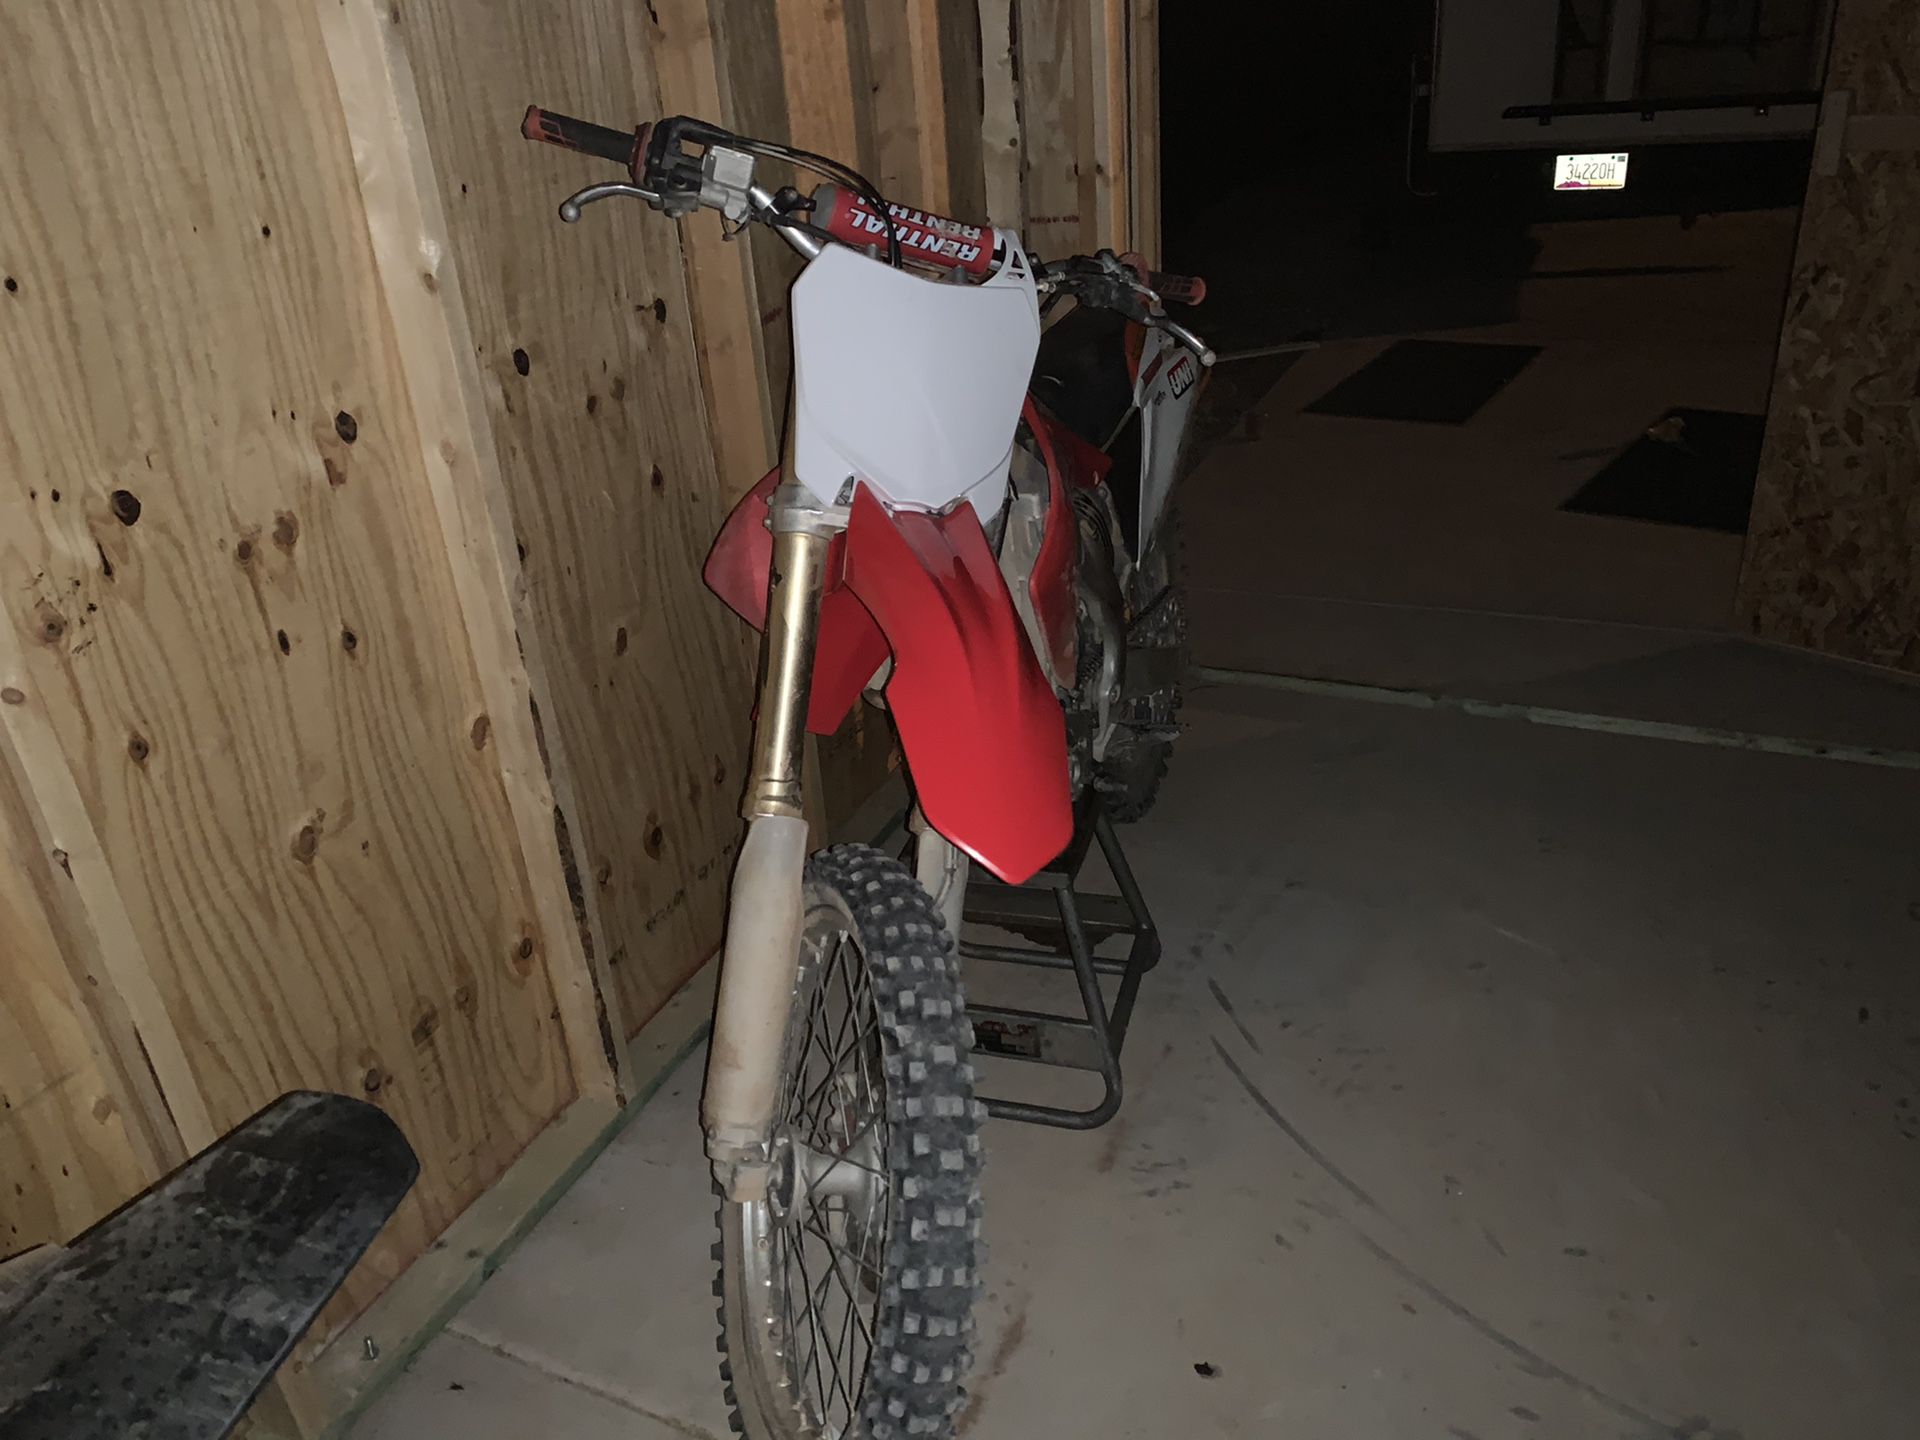 2004 Crf 250r with 2017 front end restyle kit